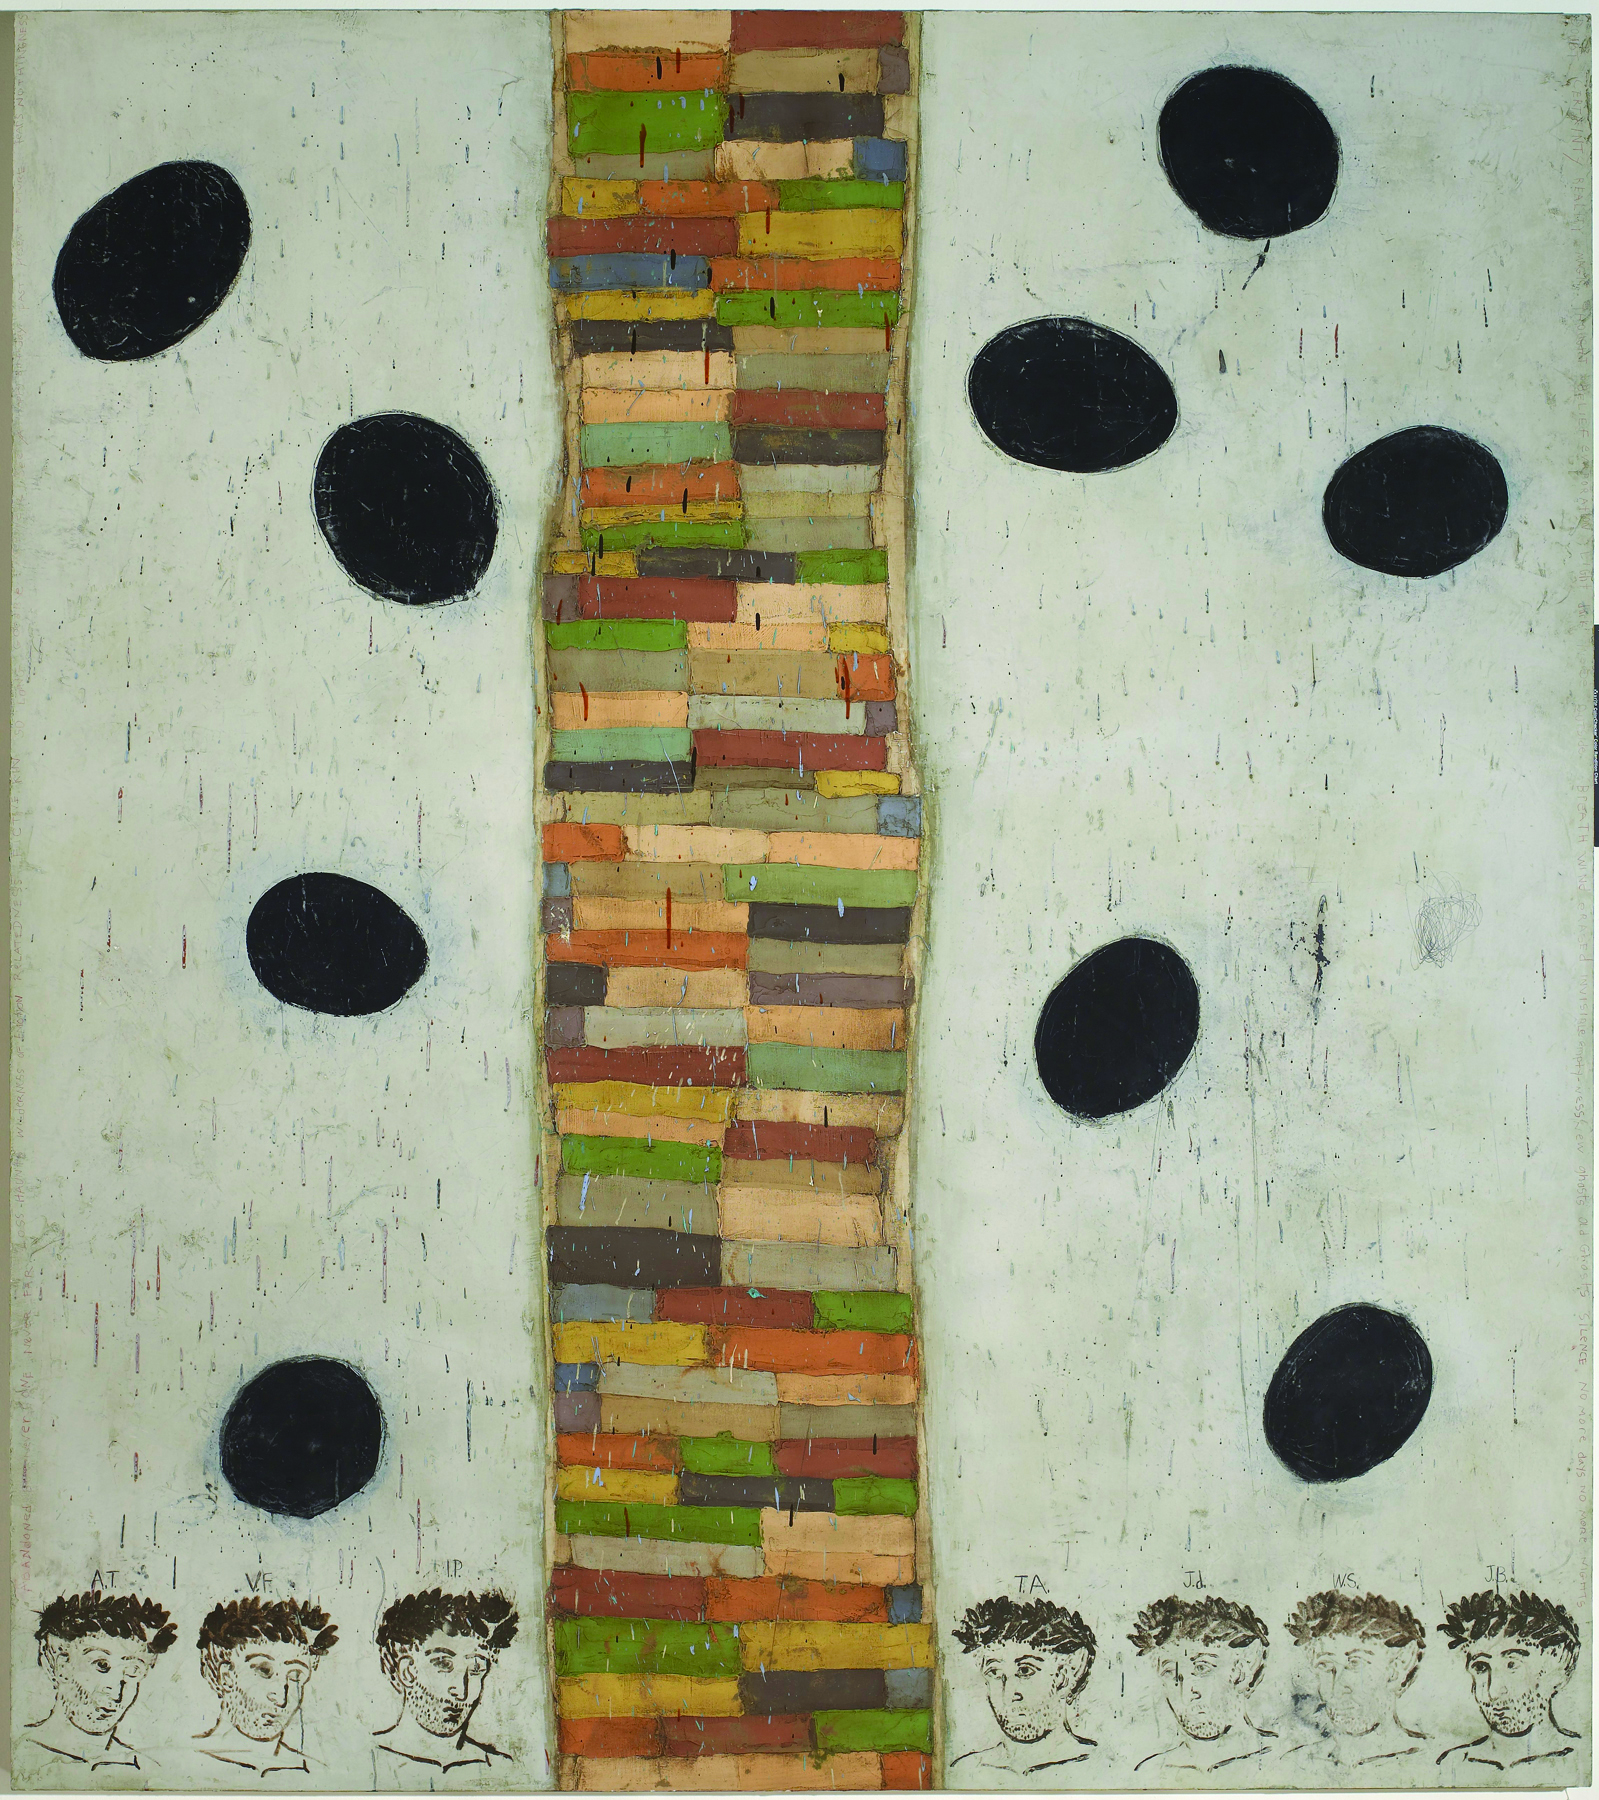 Museum of the African Diaspora :: Gone, 2005 by Squeak Carnwath